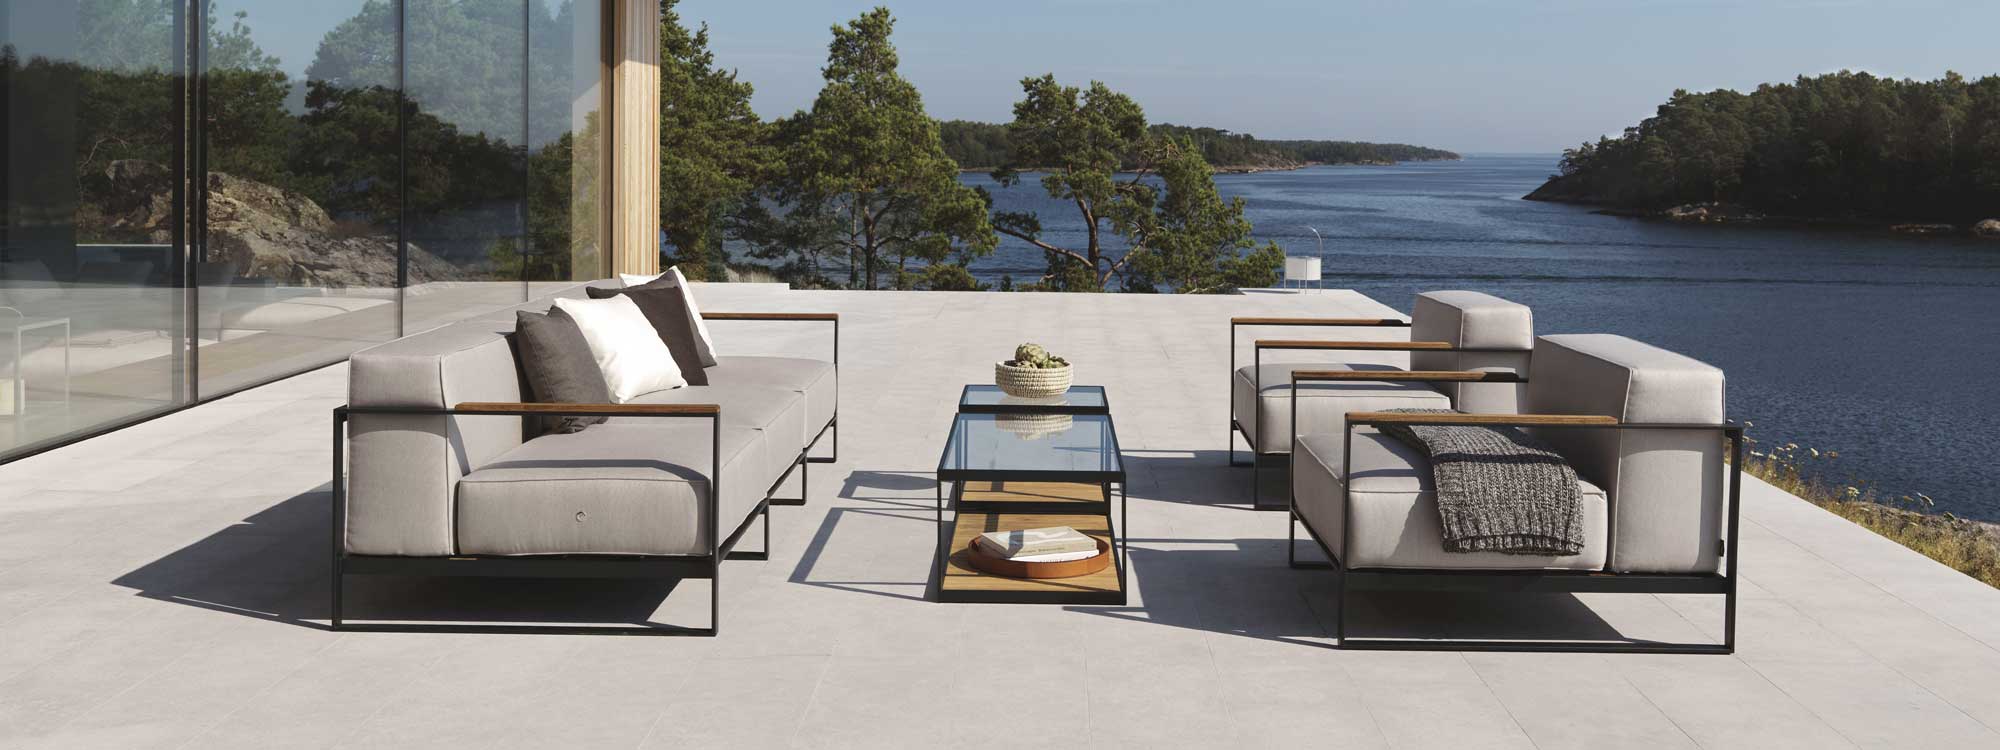 LUXURY Quality Garden Furniture Materials - Anthracite Stainless Steel, Sunbrella Fabric Cushions, Teak &* Marble